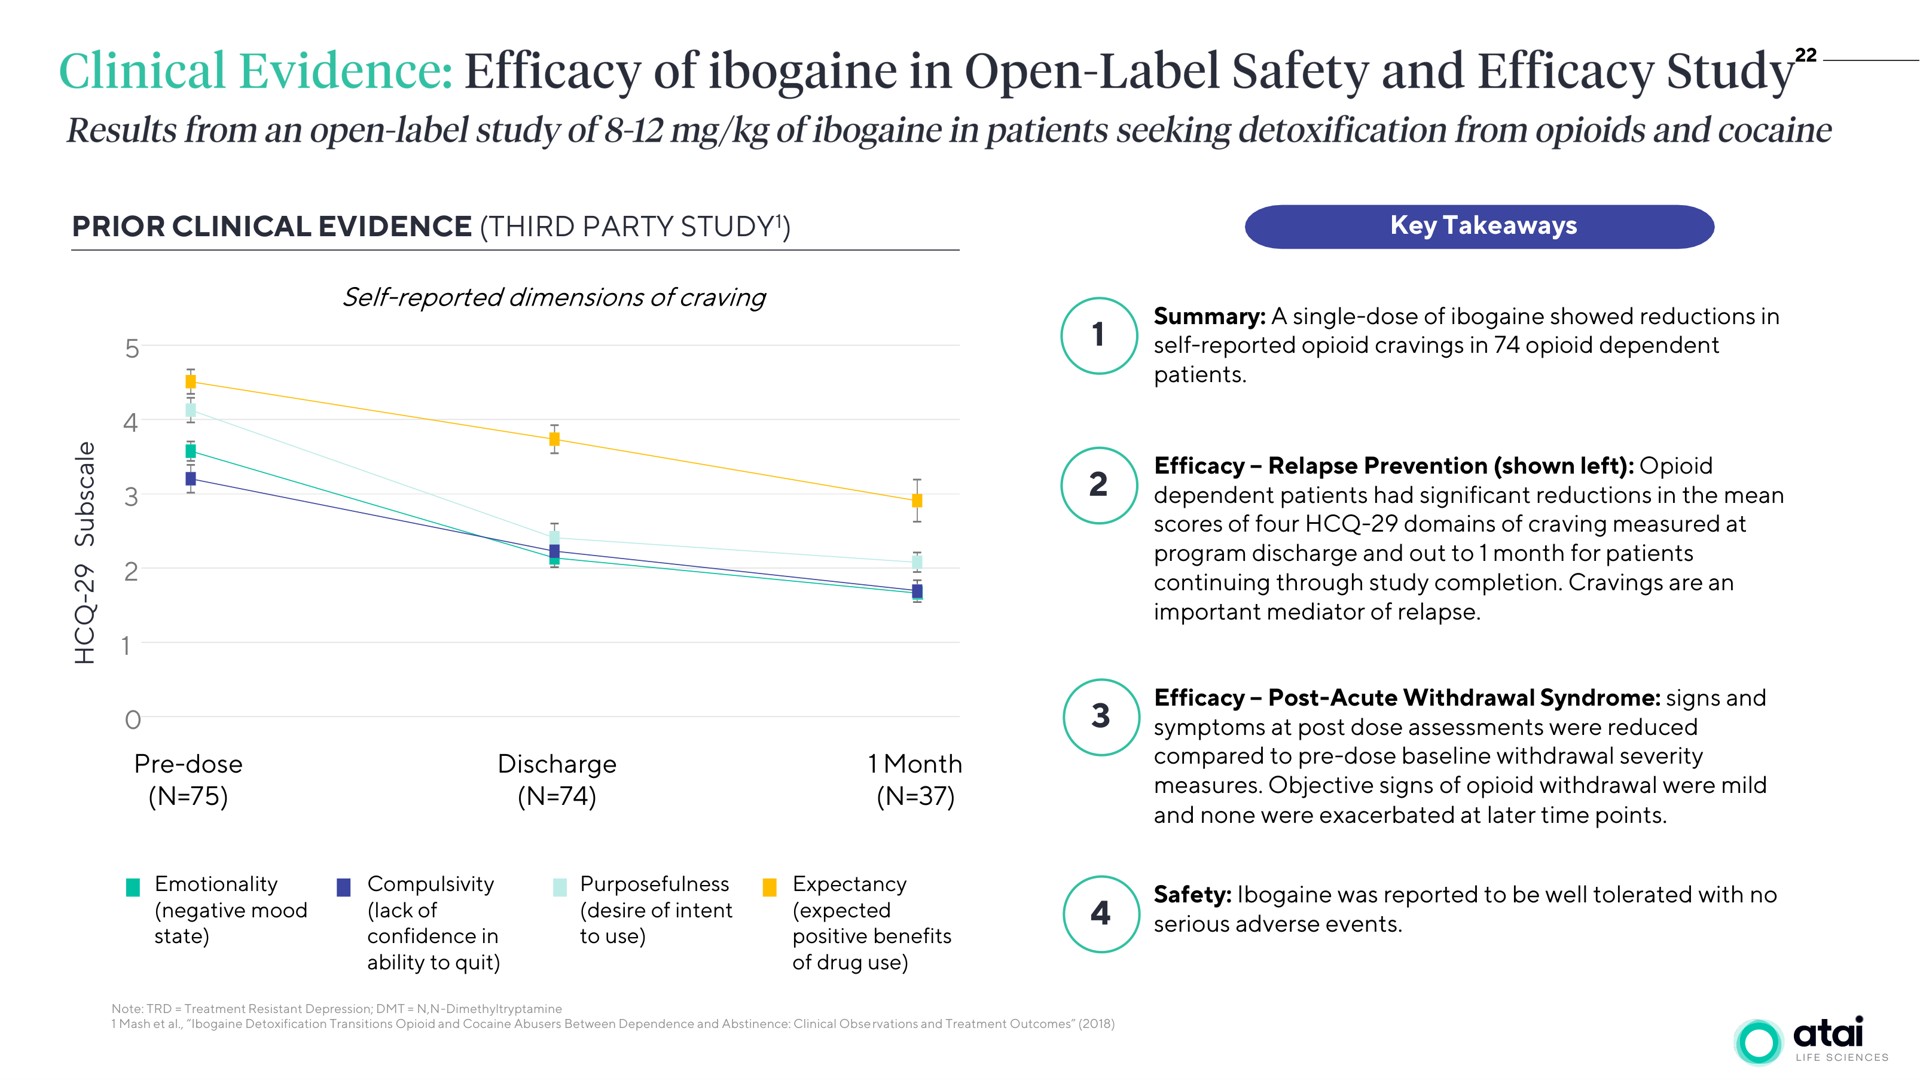 clinical evidence efficacy of in open label safety and efficacy study | ATAI